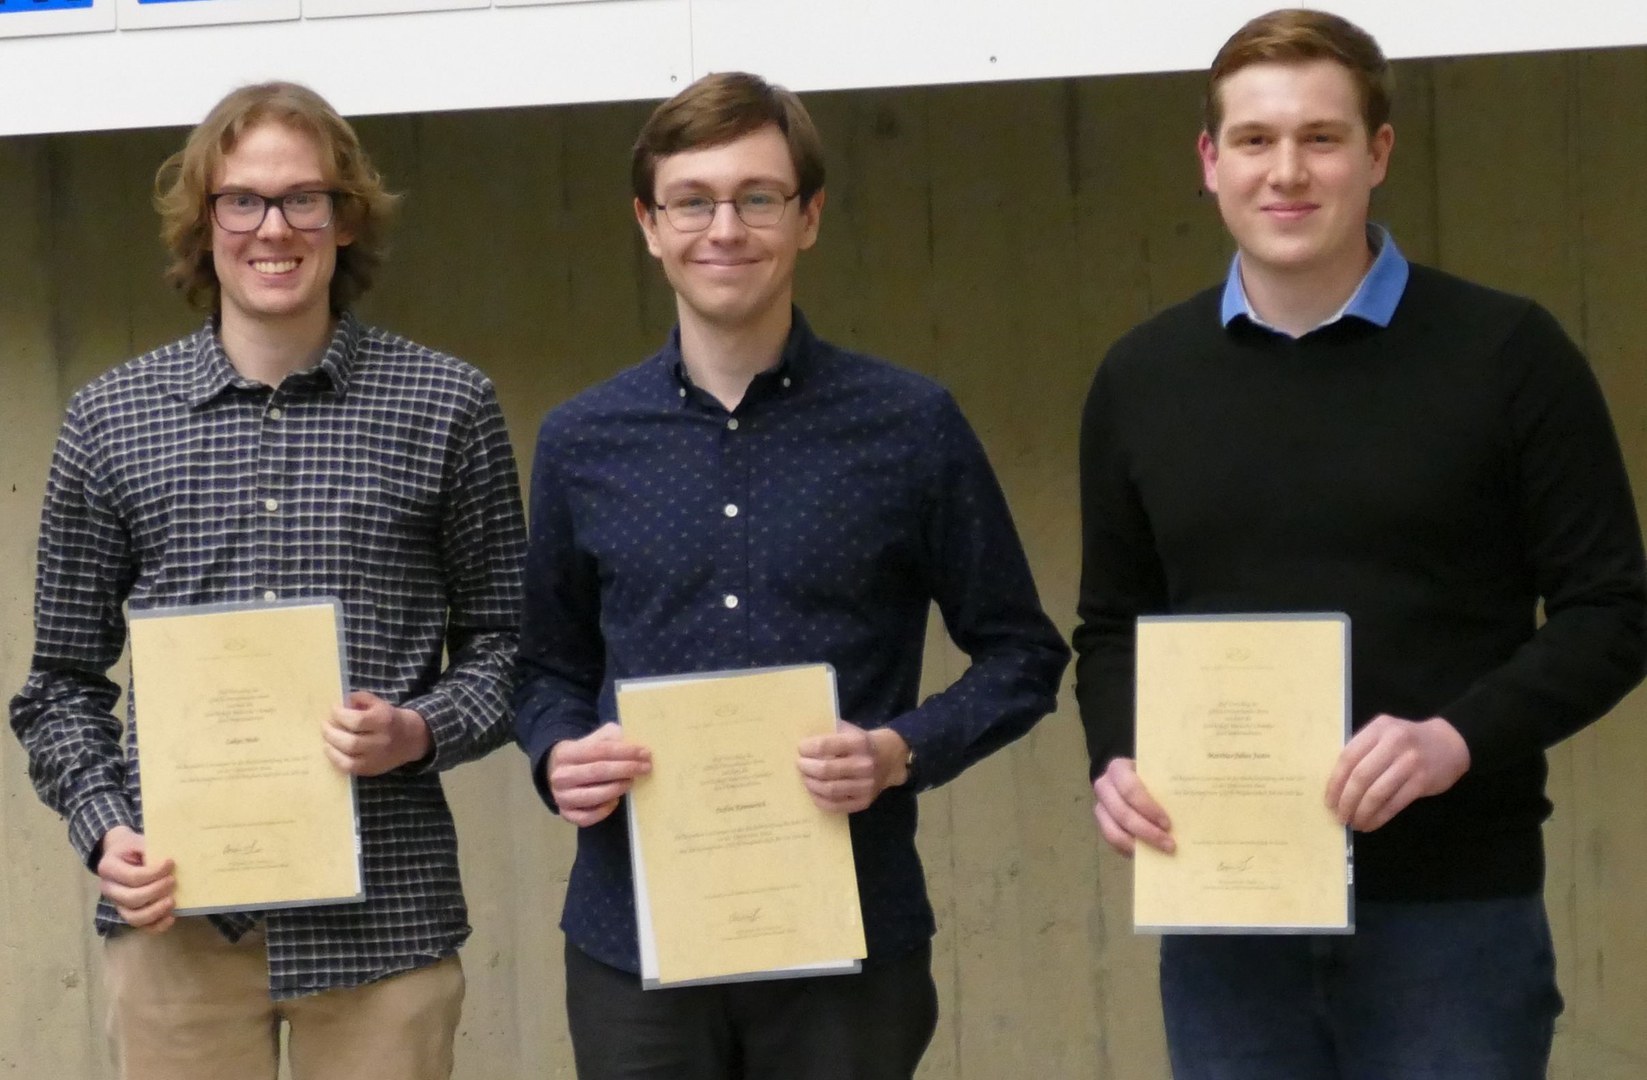 Matthias Julian Justen, Stefan Kemmerich and Lukas Mohr are honored for top academic performance